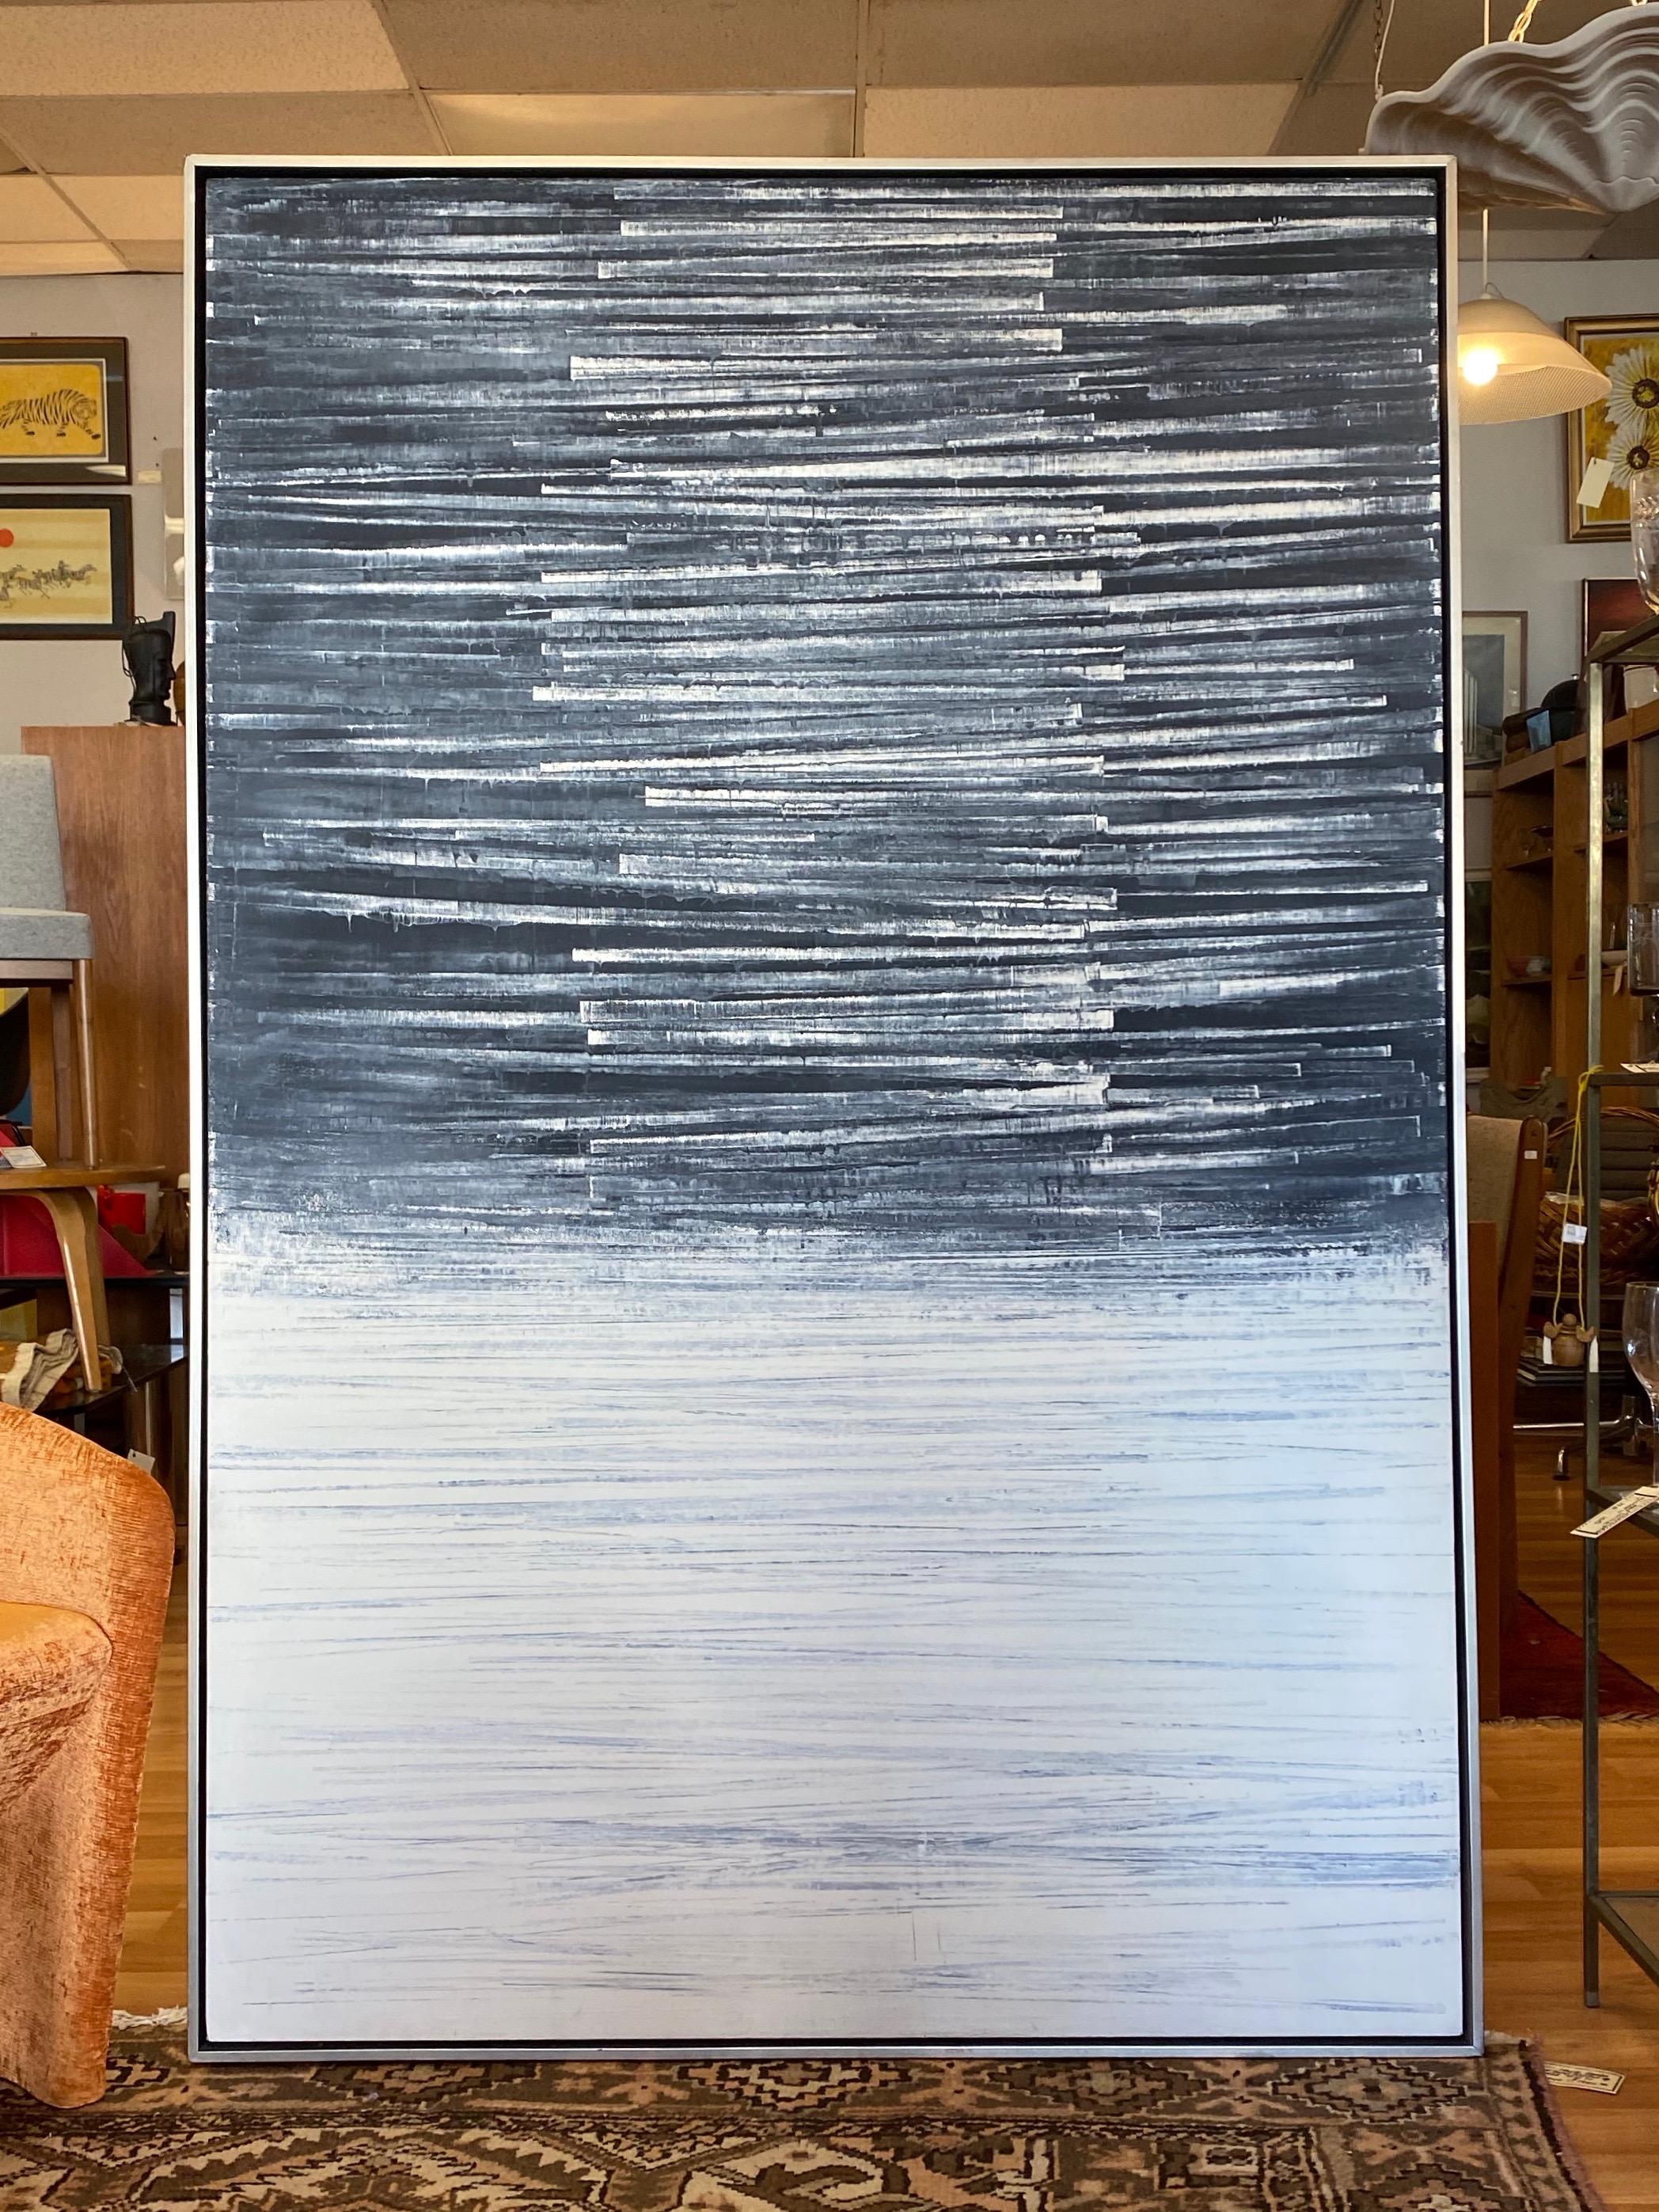 “Big City #6”, a six-foot-tall 2011 abstract acrylic painting on canvas by notable California artist Doug Glovaski (b. 1951).

An impressively sized and visually impactful entry in the artist’s muted and moody “Big City” series. Cool grey and